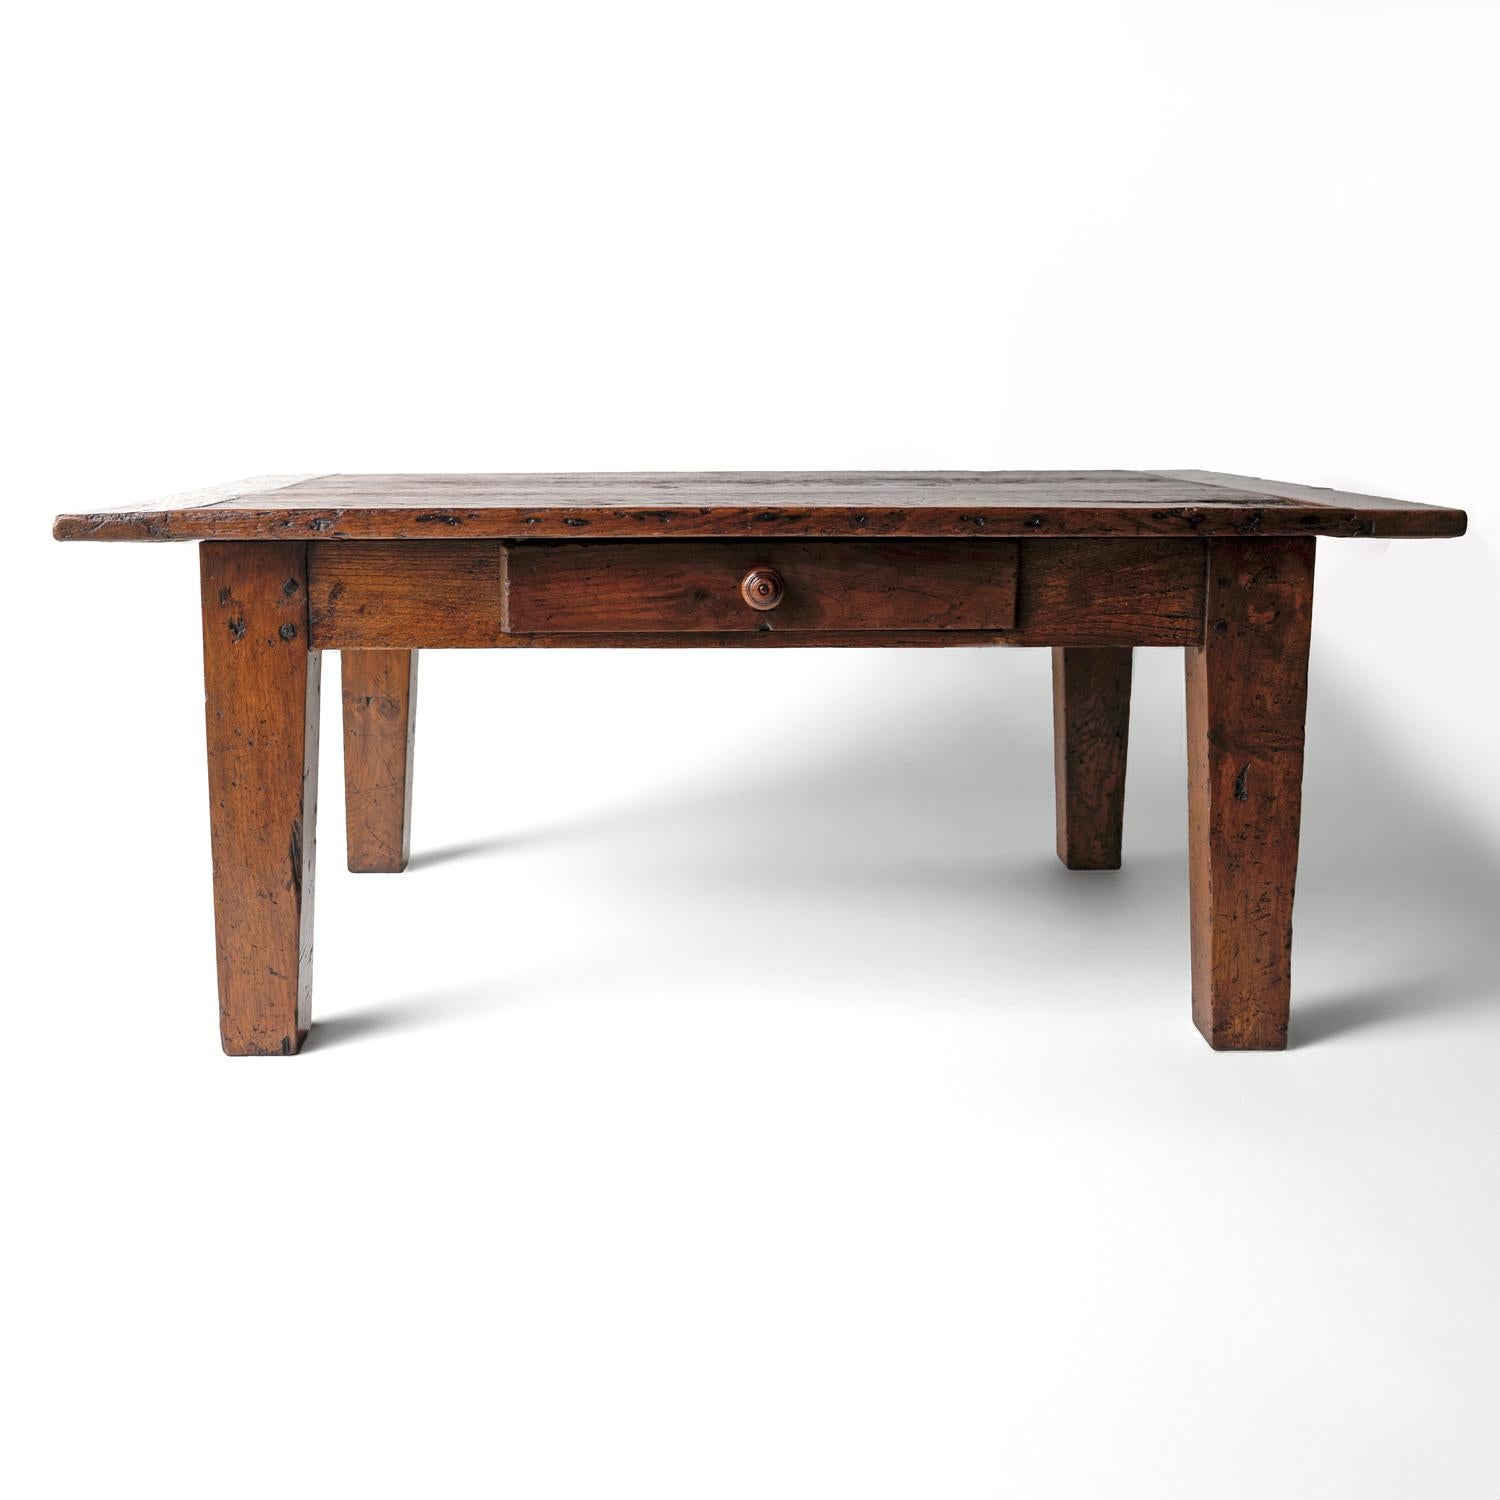 ANTIQUE COFFEE TABLE 

Provincial oak low table originating from France in the 18th century.

At some point, probably during the 20th century, it was converted from a taller table to make a low coffee table.   

Drawer to one side with original